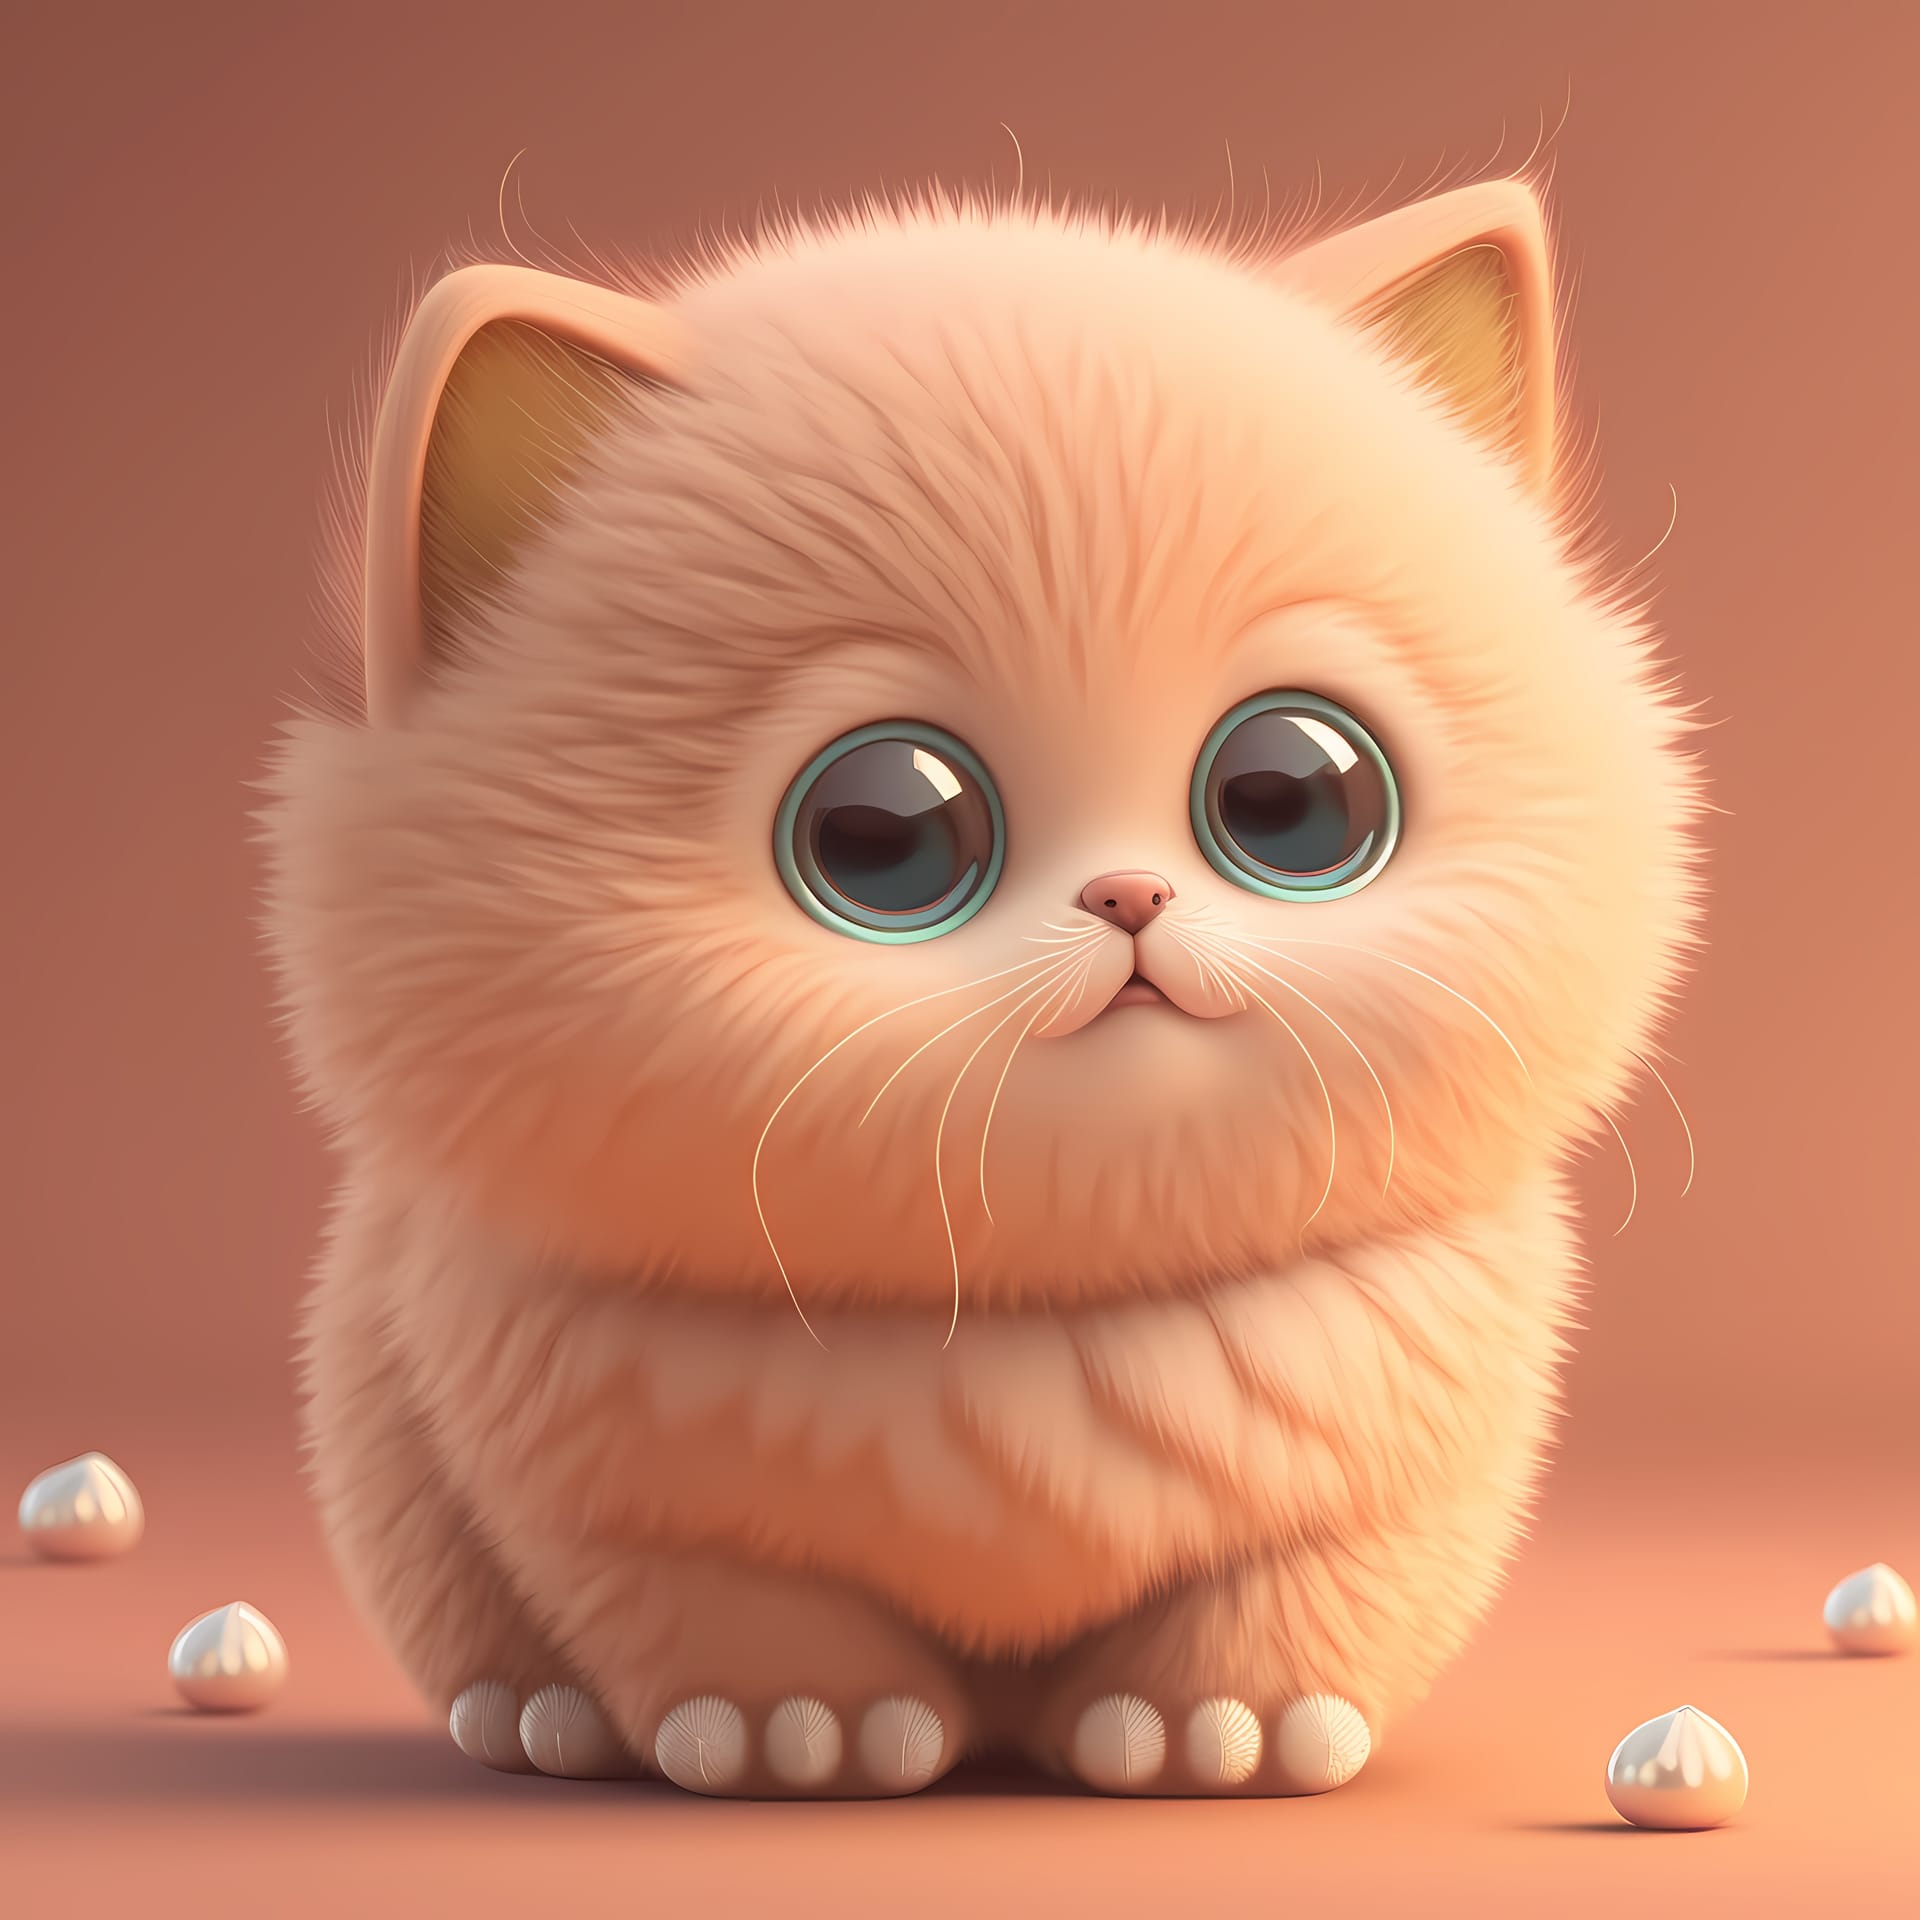 Adorable cute chubby cat 3d render moody image